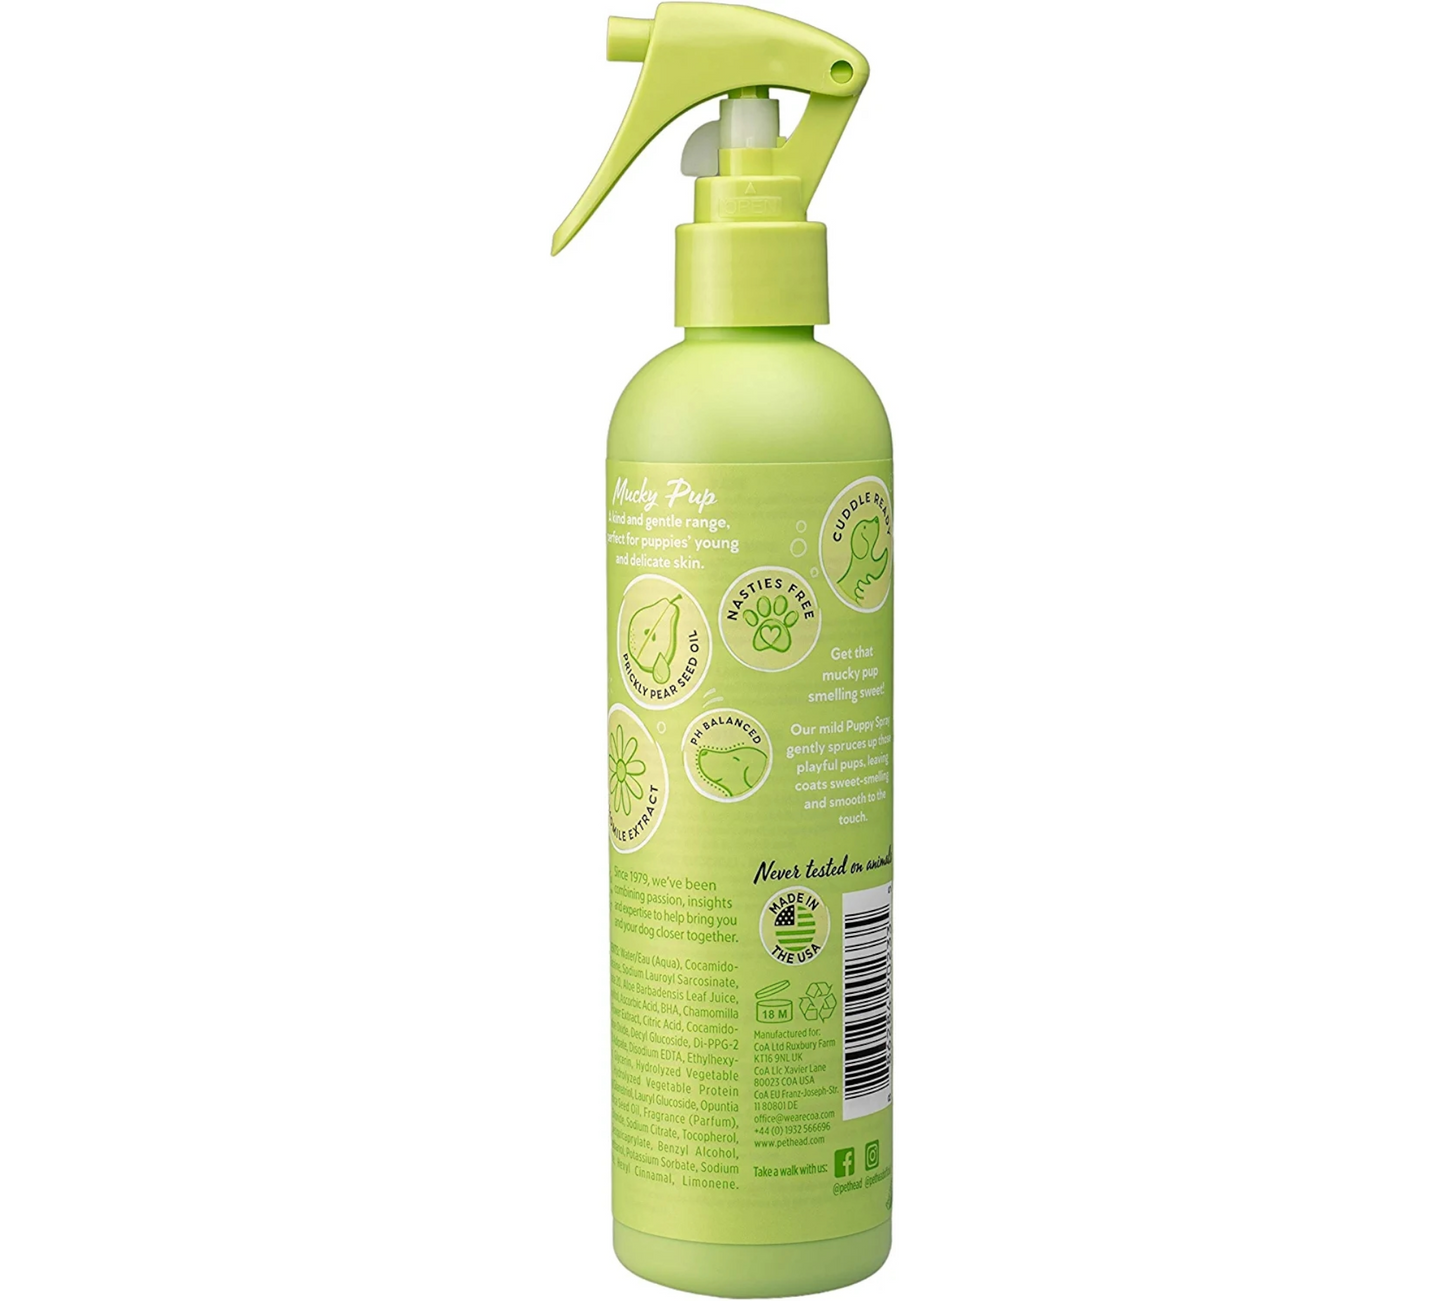 Canine's World Dog Cologne Pet Head Mucky Pup Puppy Spray Pear with Chamomile Pet Head